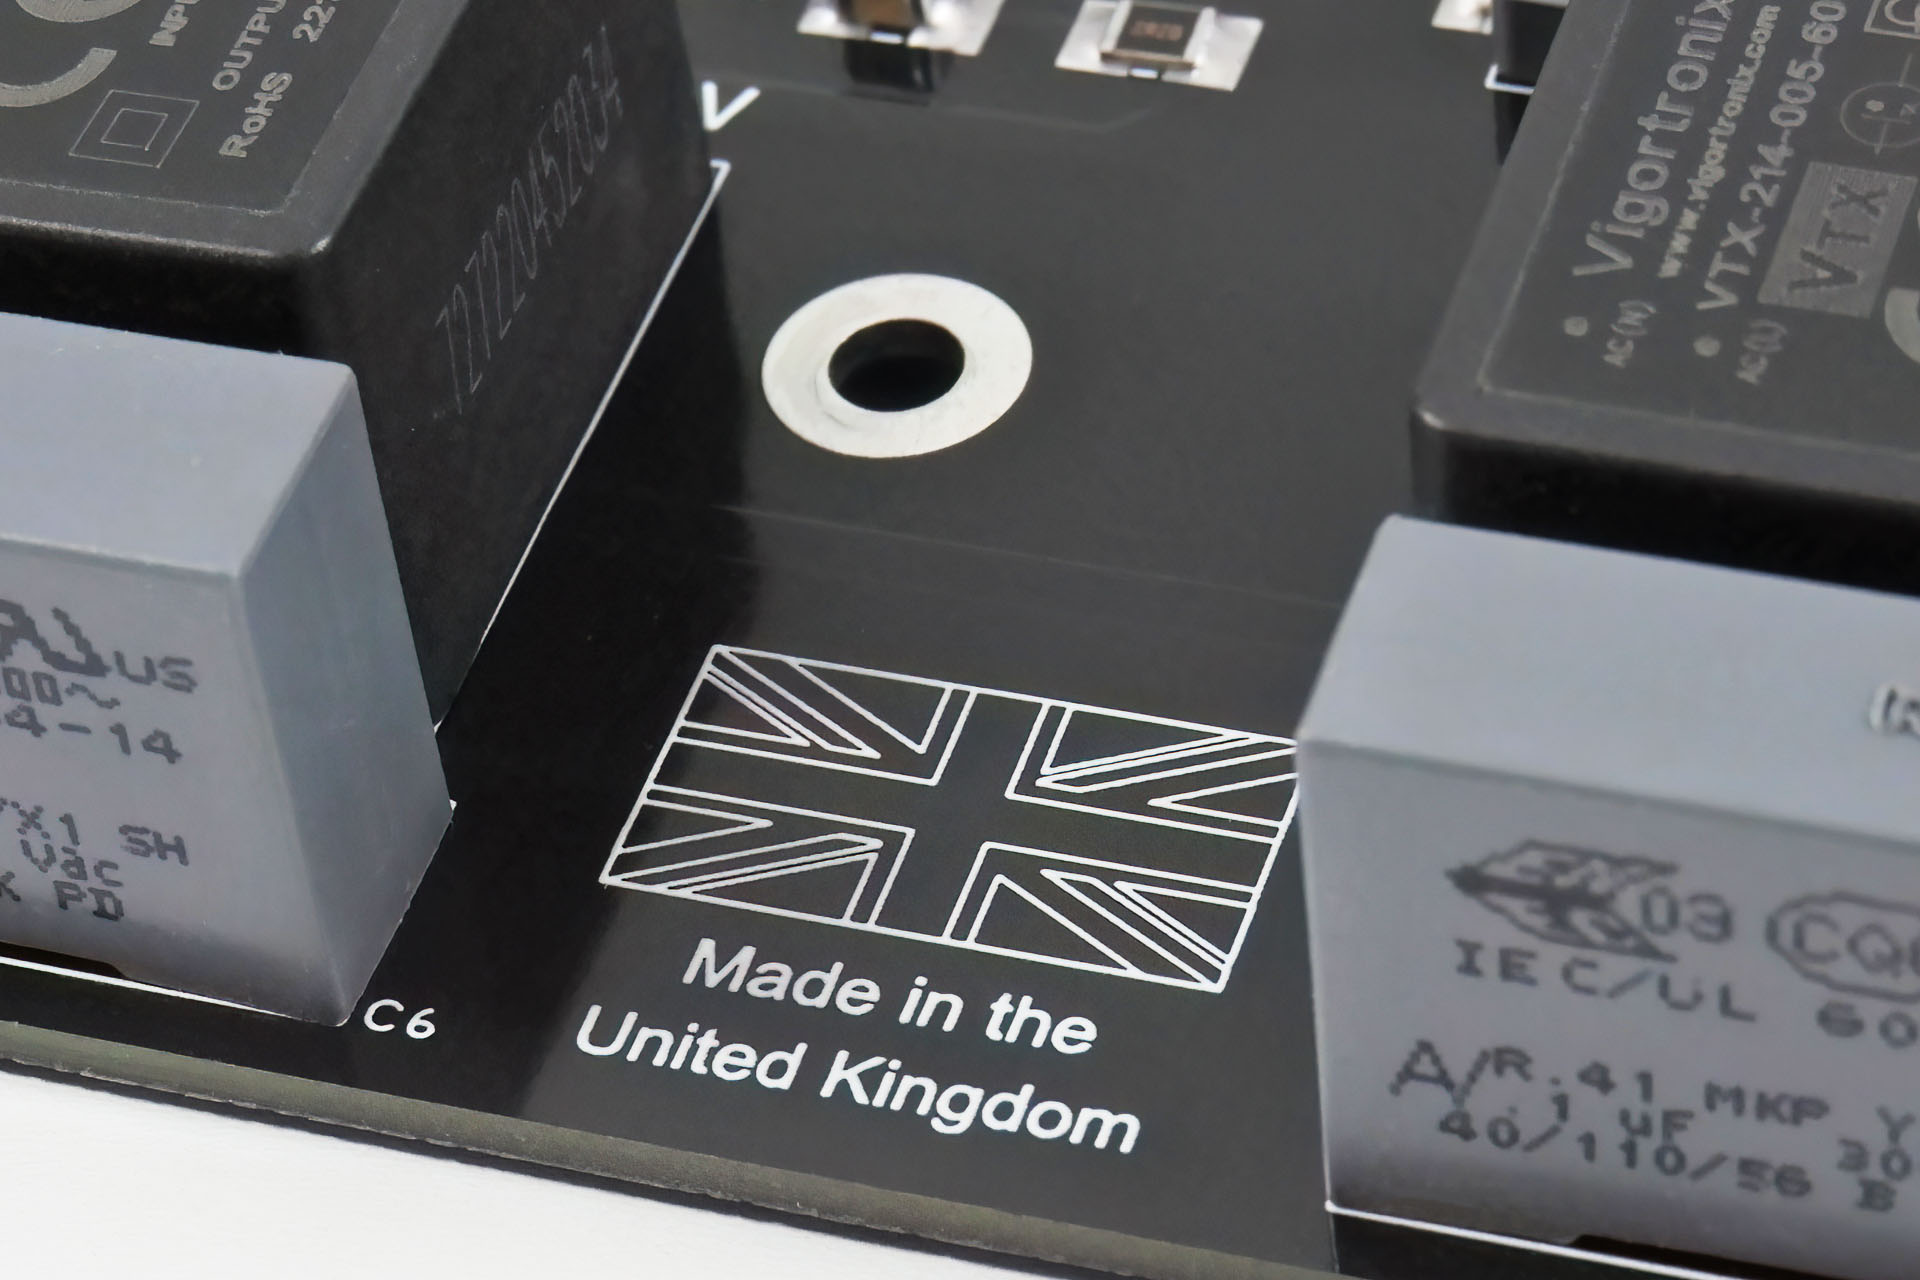 Galaxy modular switched-mode power supply for the Behringer DEQ2496 Pro is made in the UK